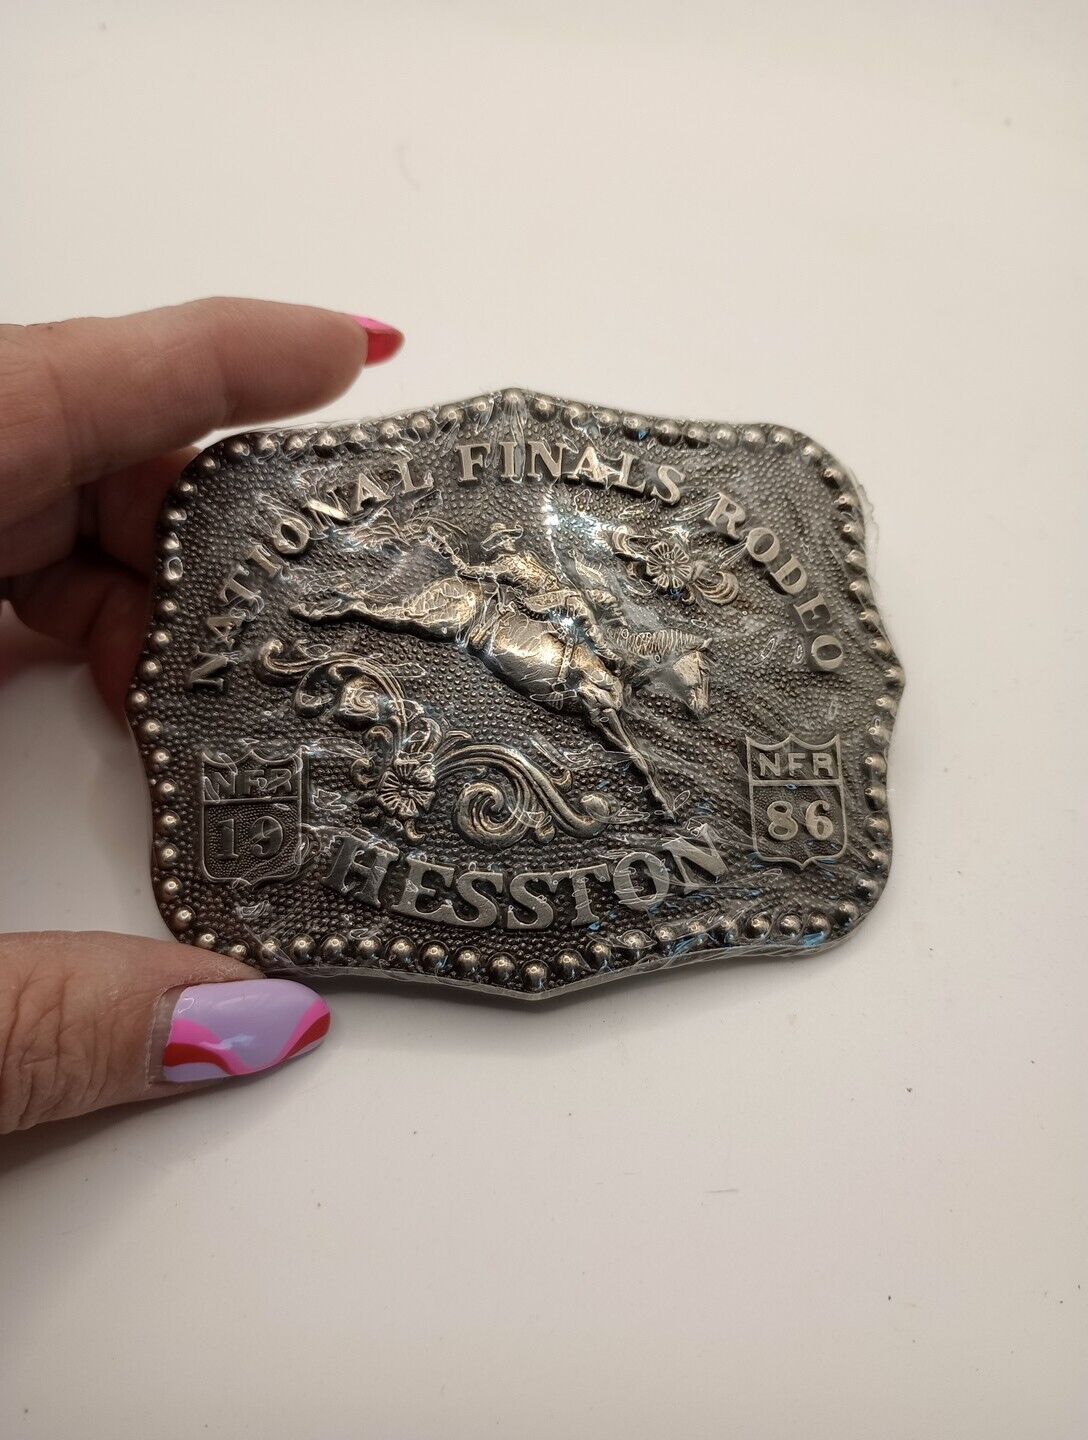 Rare Fred Fellows VTG Hesston National Finals Rodeo Buckle 4th Edition Sealed 